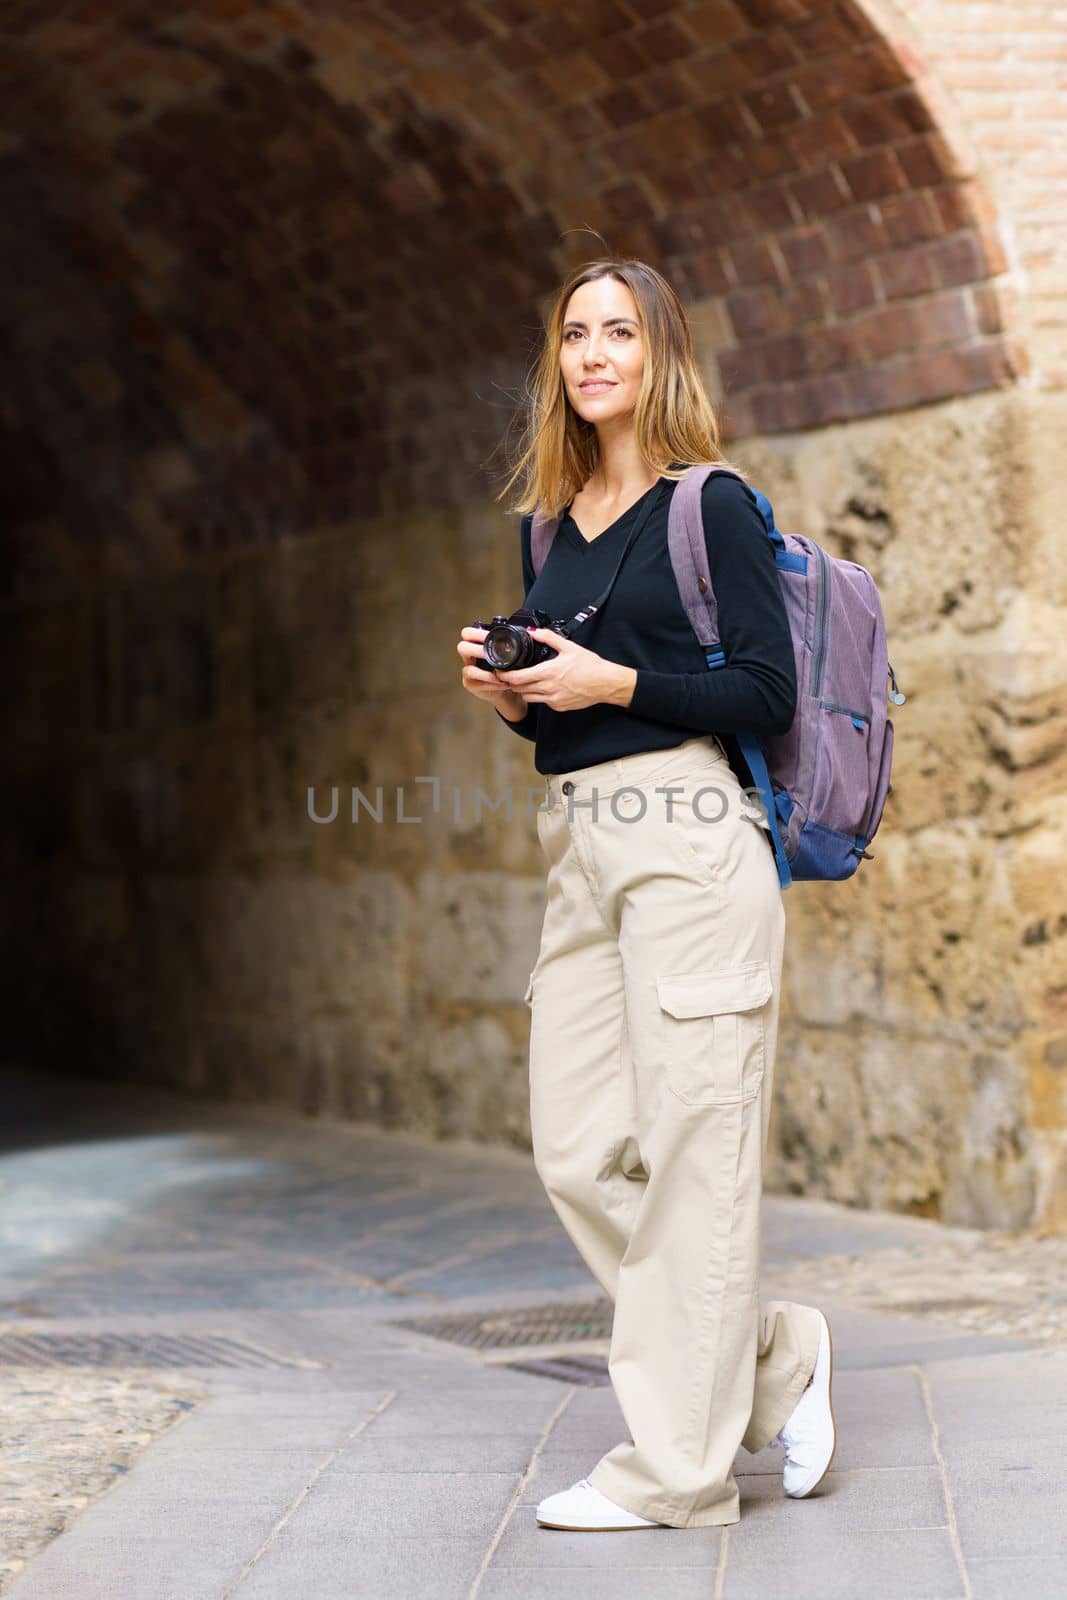 Side view of positive young female tourist with blond hair in casual wear and backpack, using photo camera and smiling while standing near ages stone archway during sightseeing trip